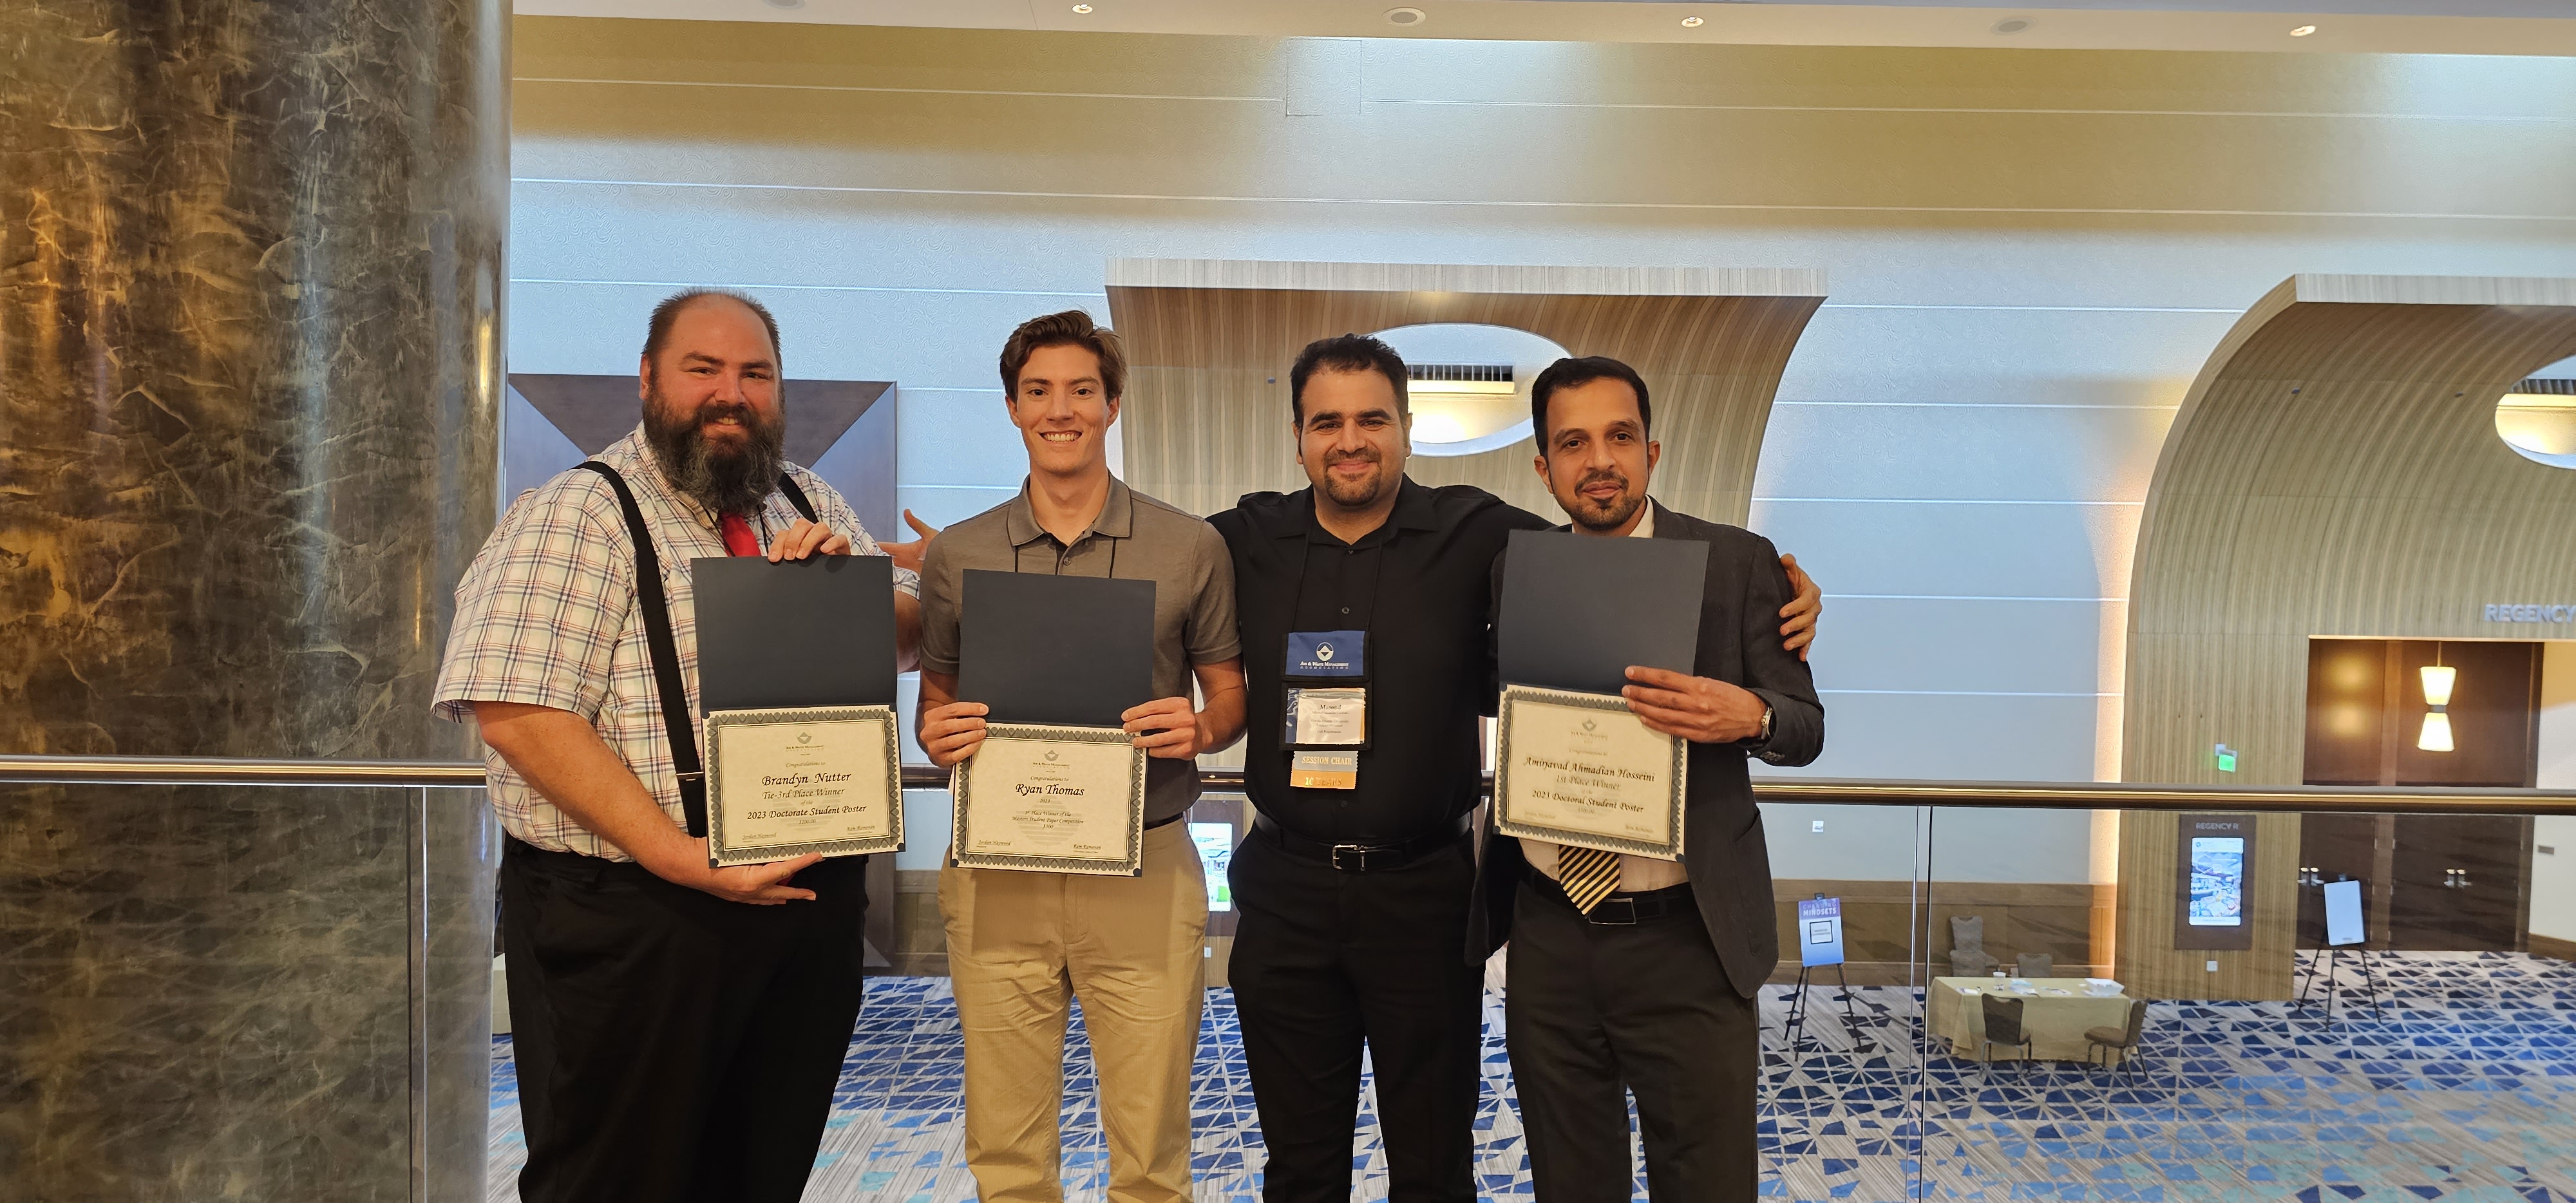 CEGE graduate students received prestigious awards at the 116th Air and Waste Management Association (A&WMA) Annual Conference and Exhibition 